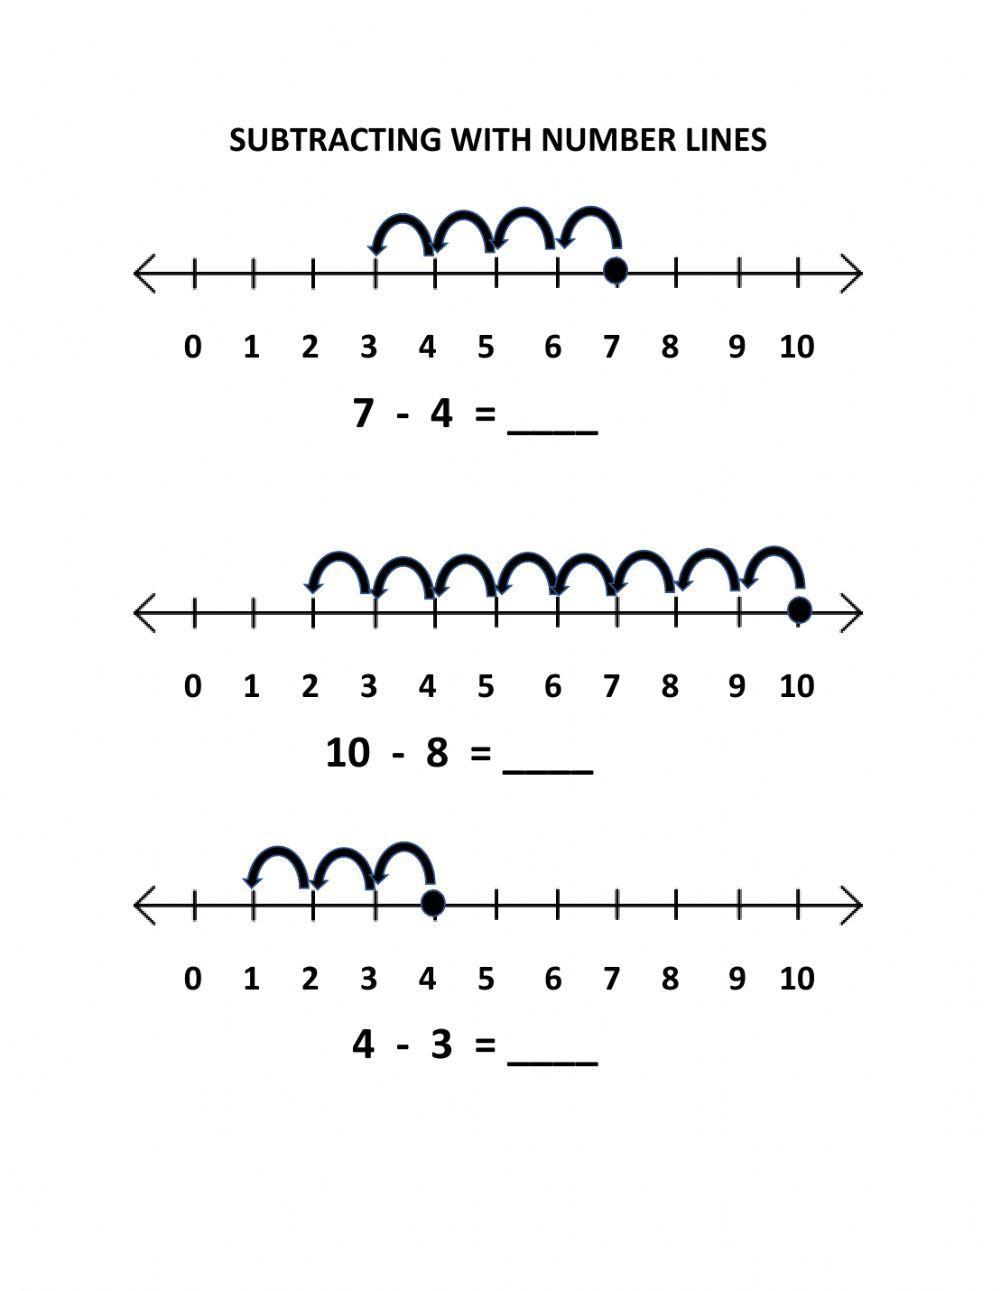 Subtracting with Number Lines